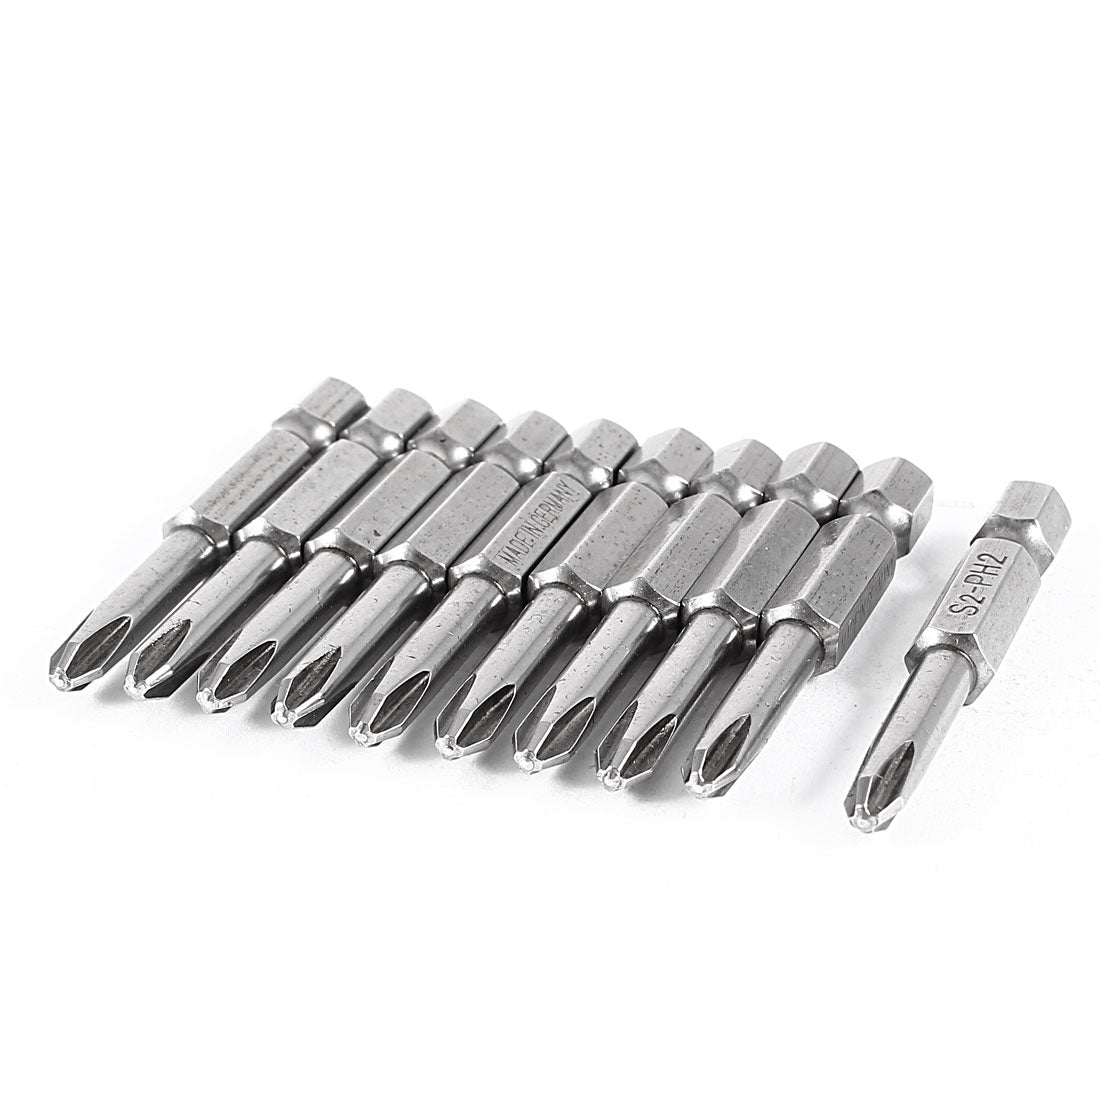 uxcell Uxcell 10 Pcs Magnetic 50mm Long 1/4" Hex Shank 4.5mm PH2 Phillips Point Tip Power Driver Screwdriver Bits